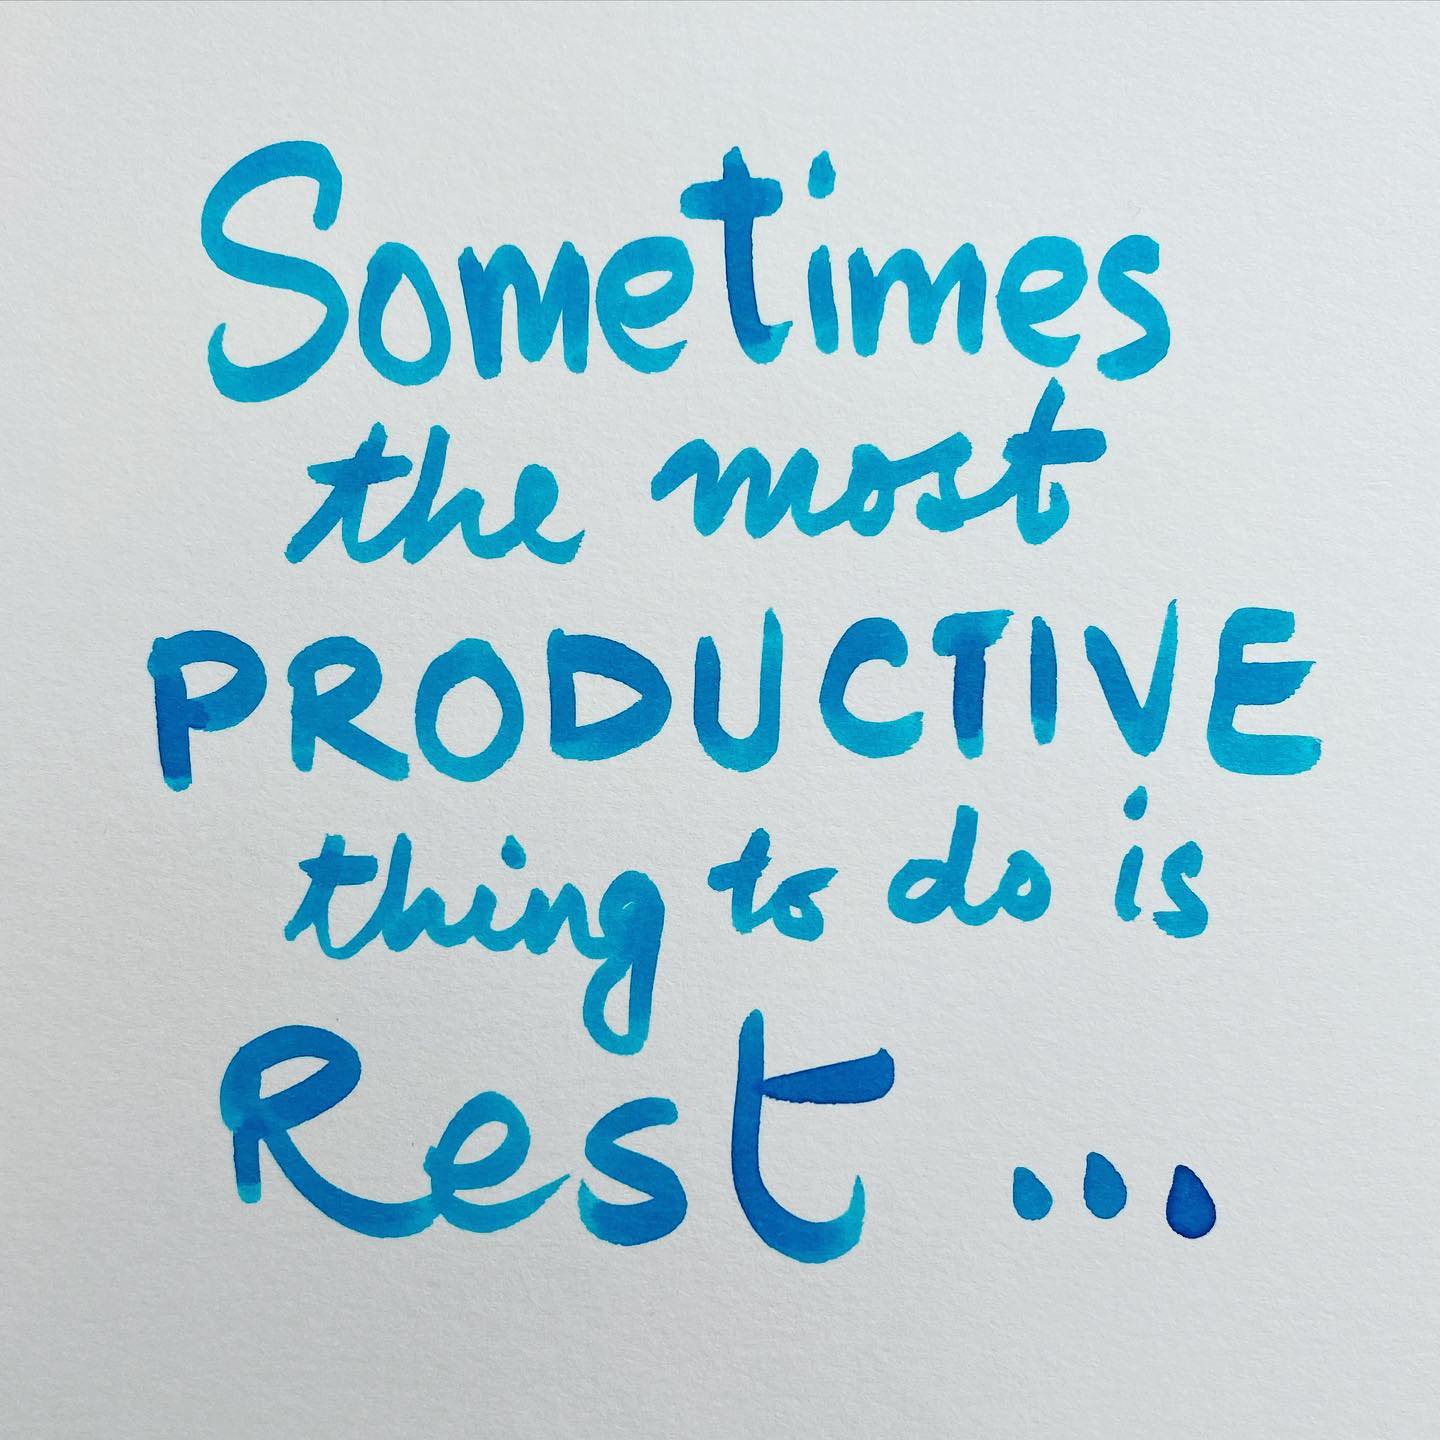 Have a restful weekend!